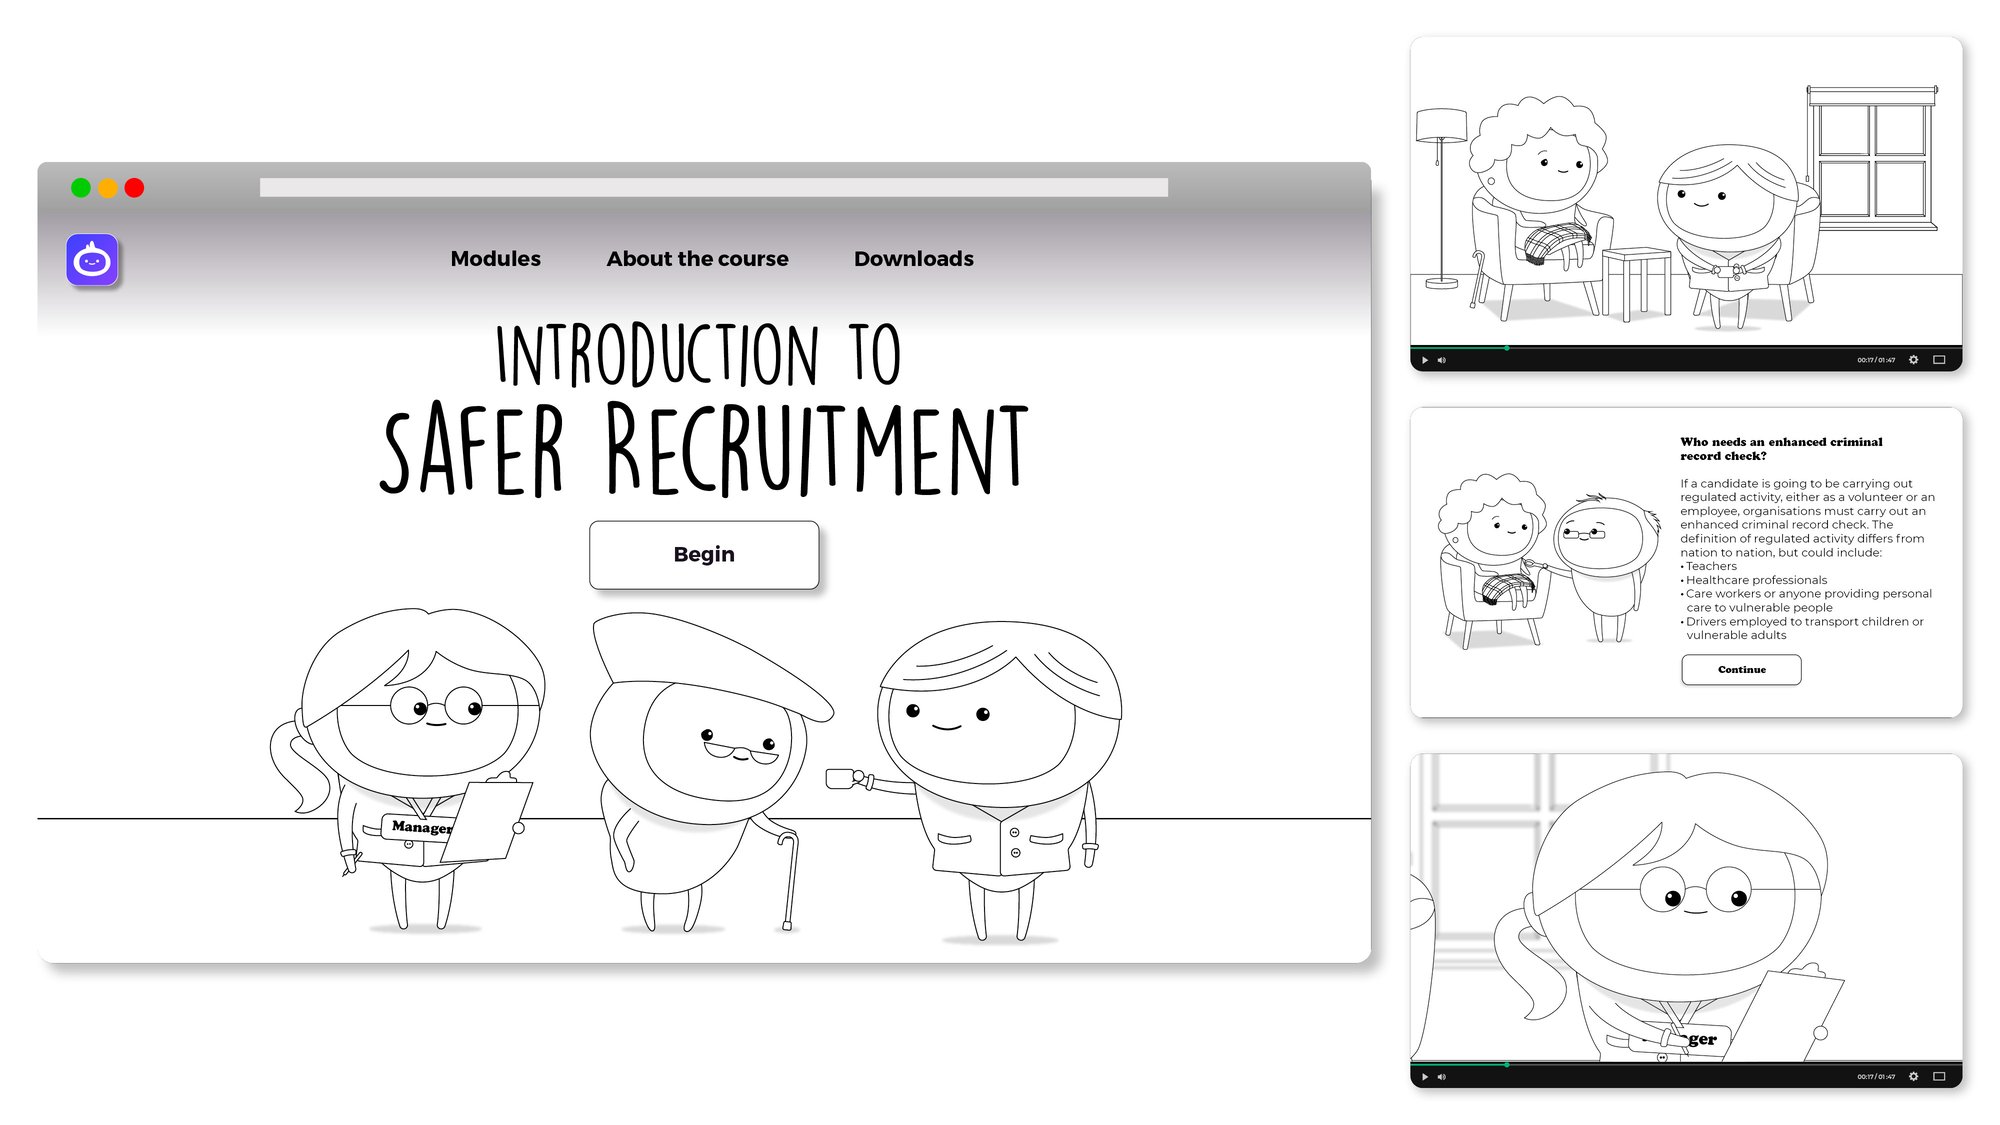 iAM00159 – Introduction to Safer Recruitment – Landing Page